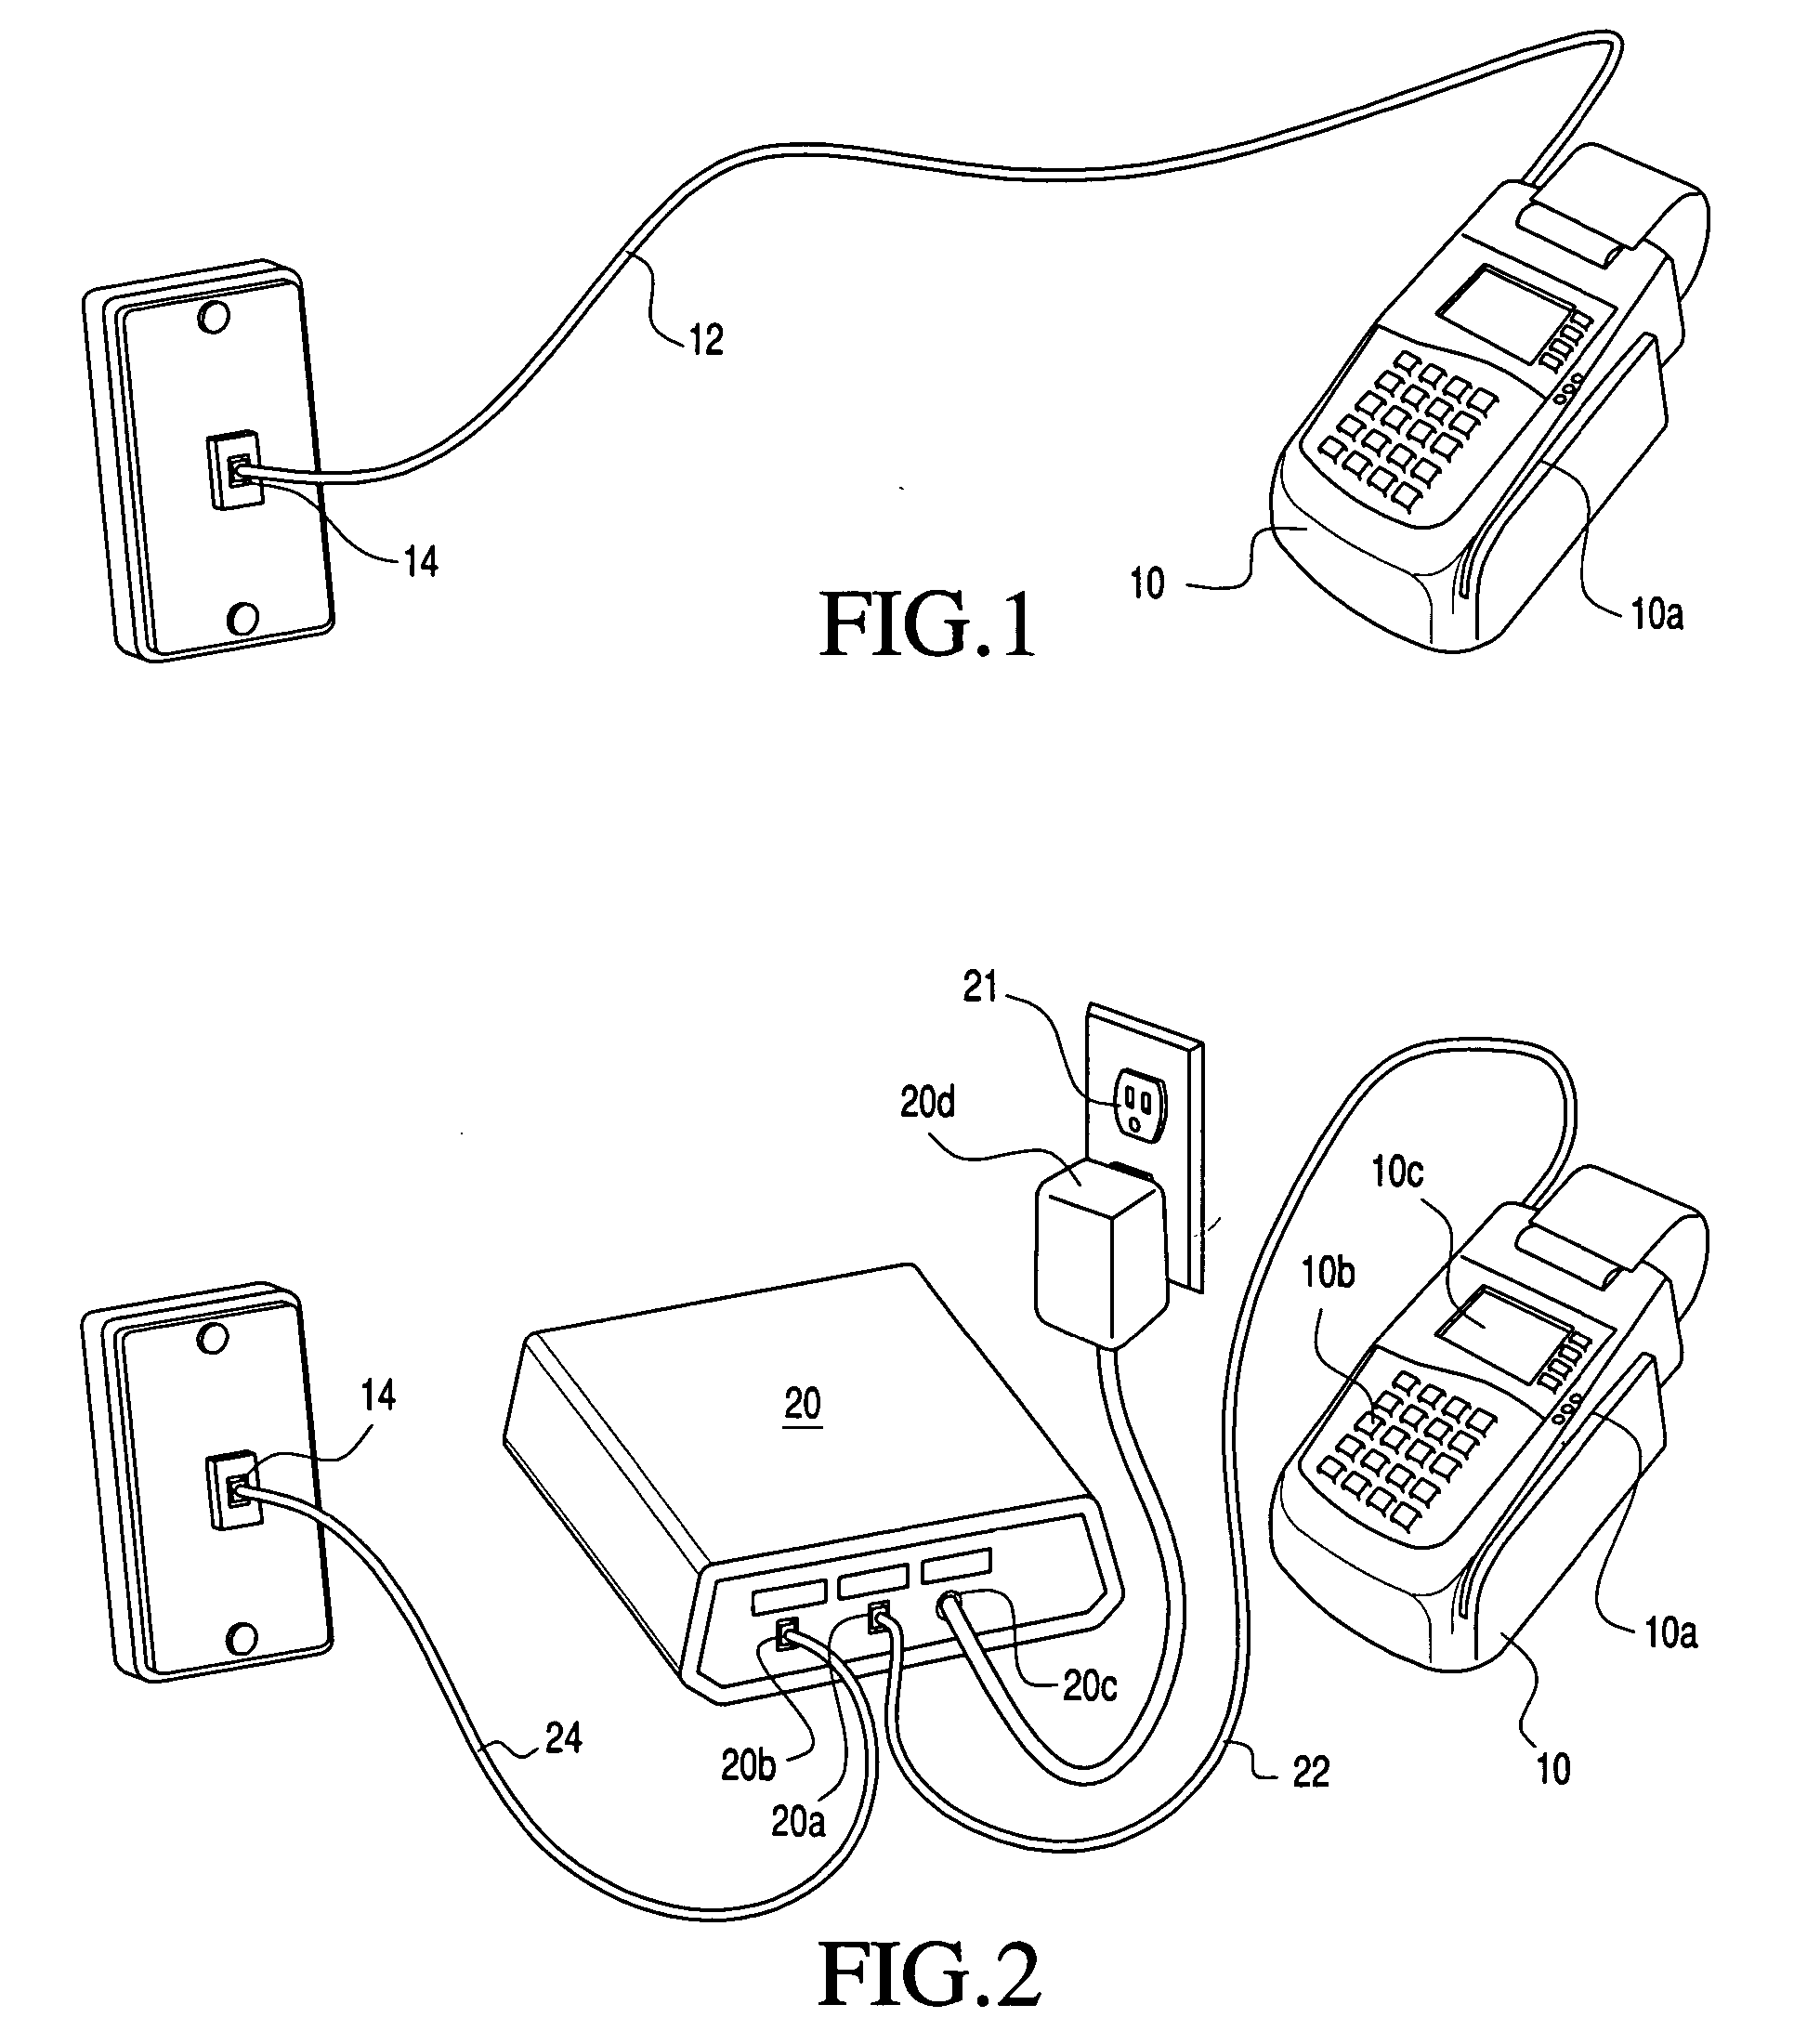 Intelligent transaction router and process for handling multi-product point of sale transactions